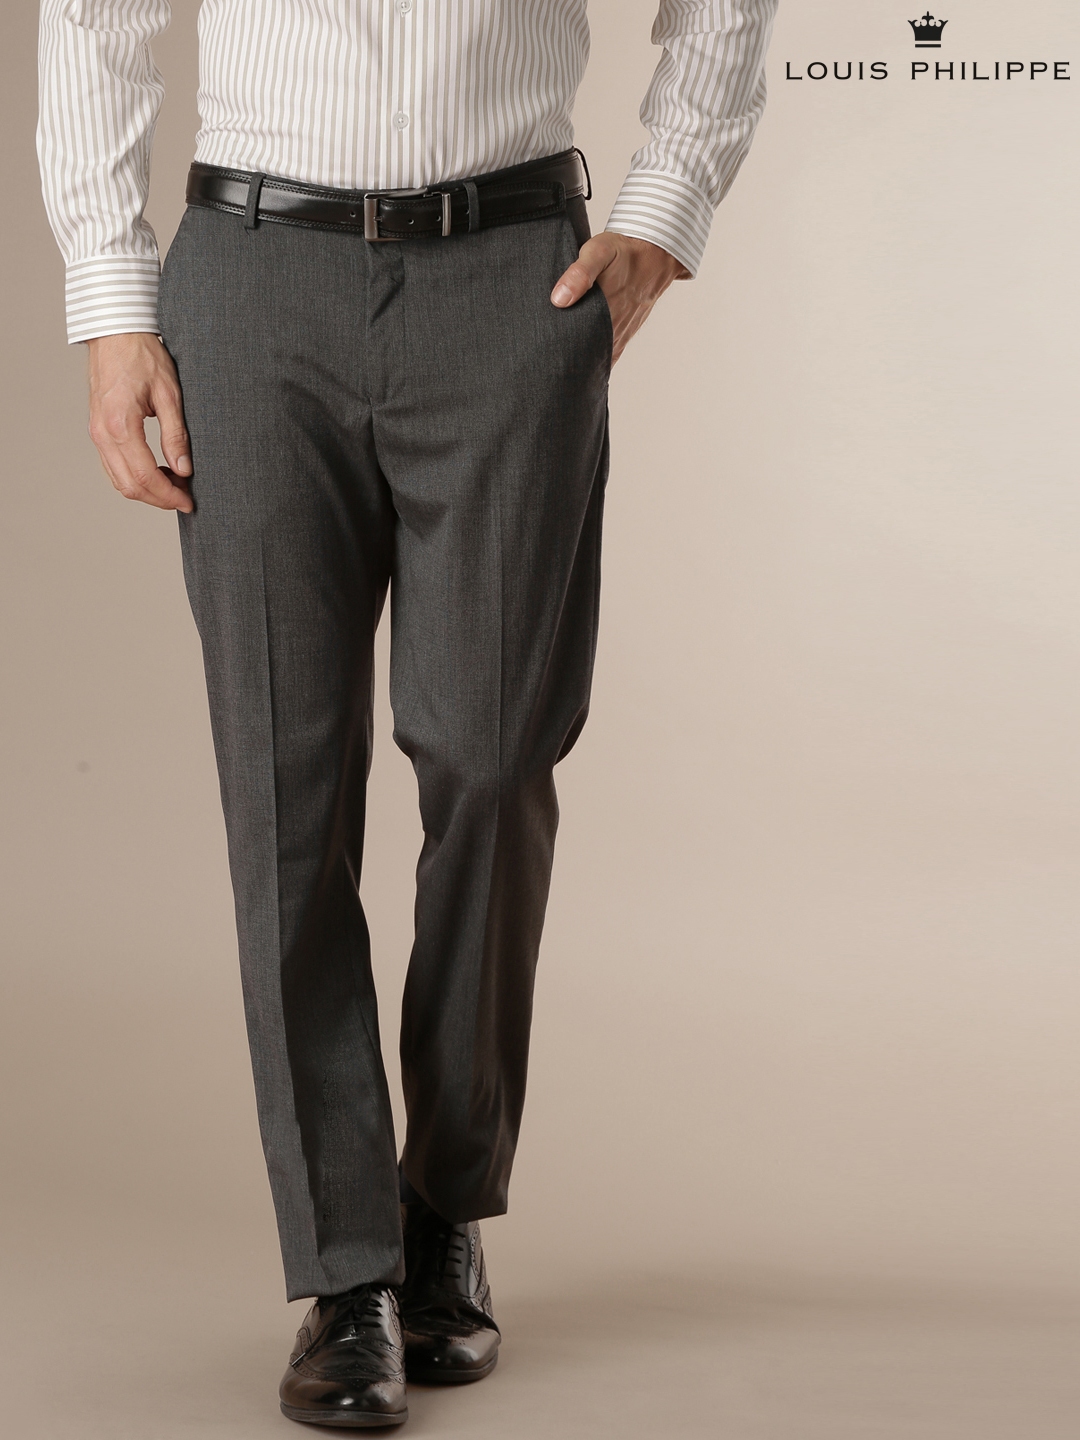 Buy Louis Philippe Dark Grey Slim Fit Flat Front Trousers for Mens Online   Tata CLiQ